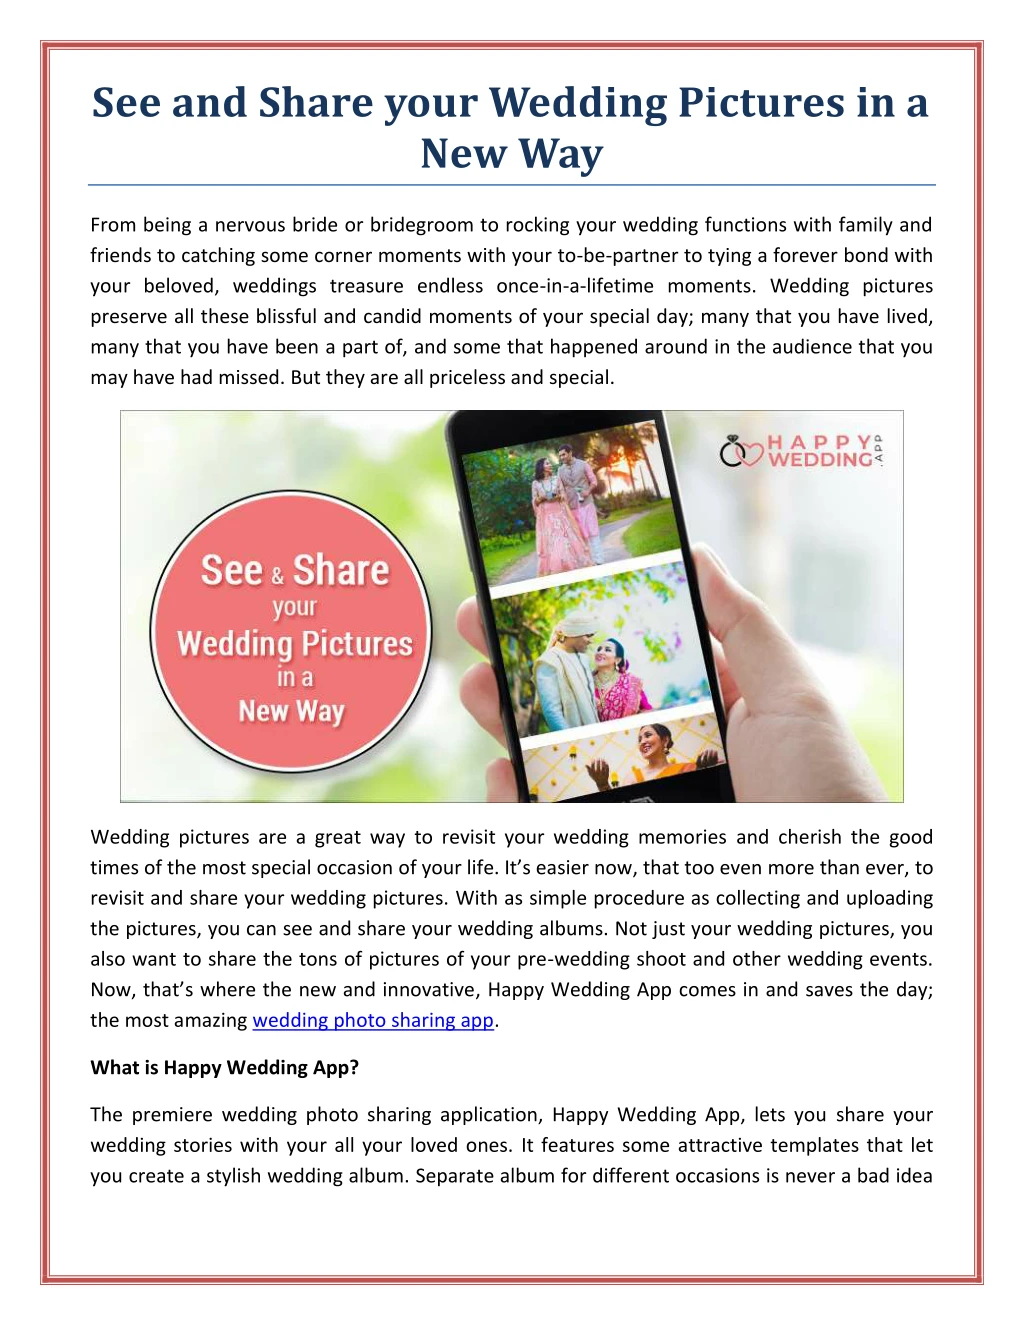 see and share your wedding pictures in a new way